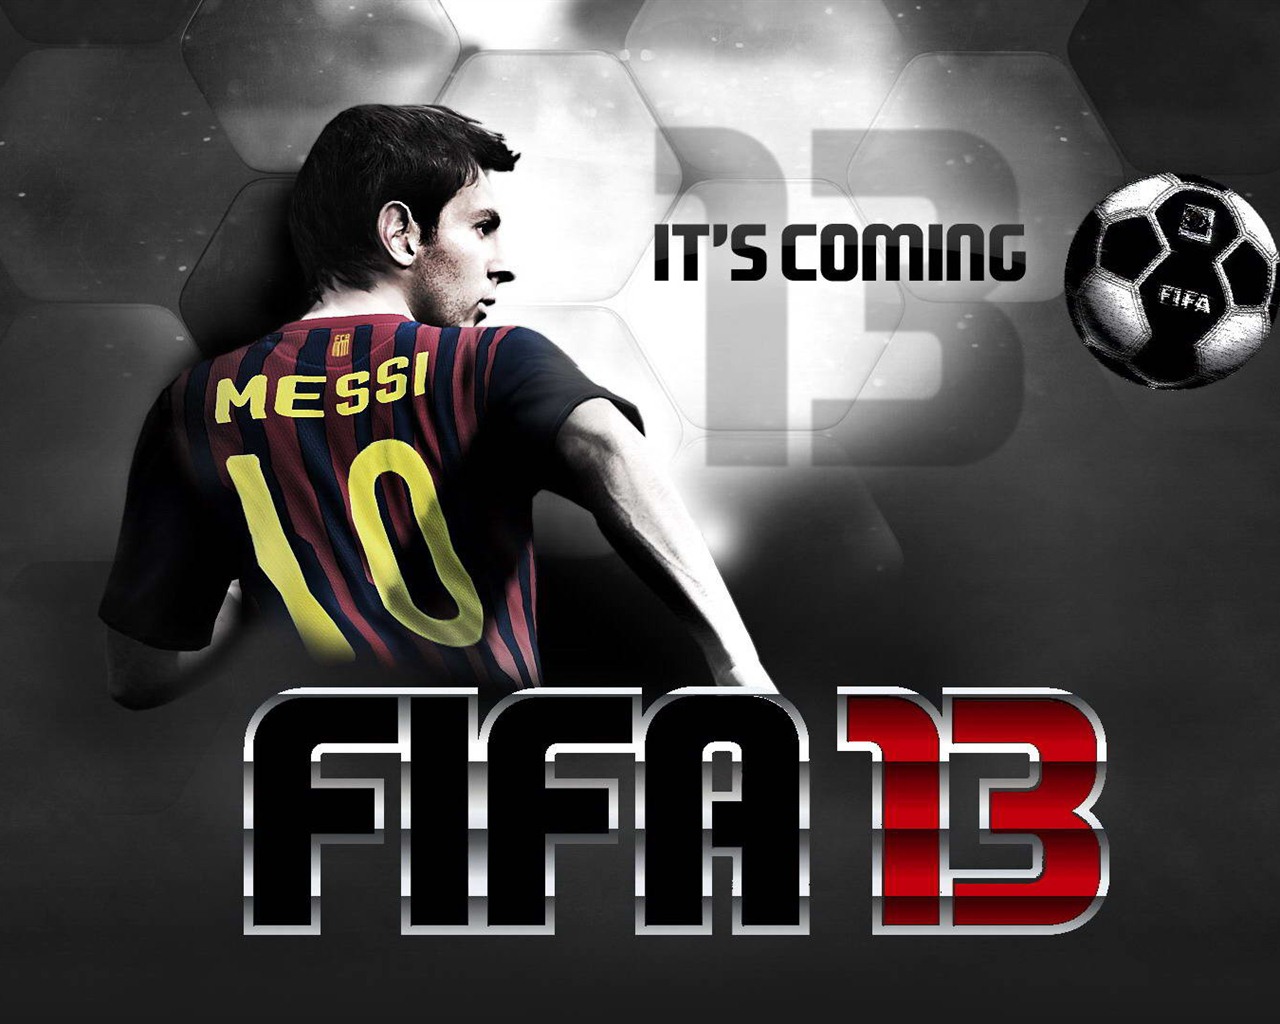 FIFA 13 game HD wallpapers #1 - 1280x1024